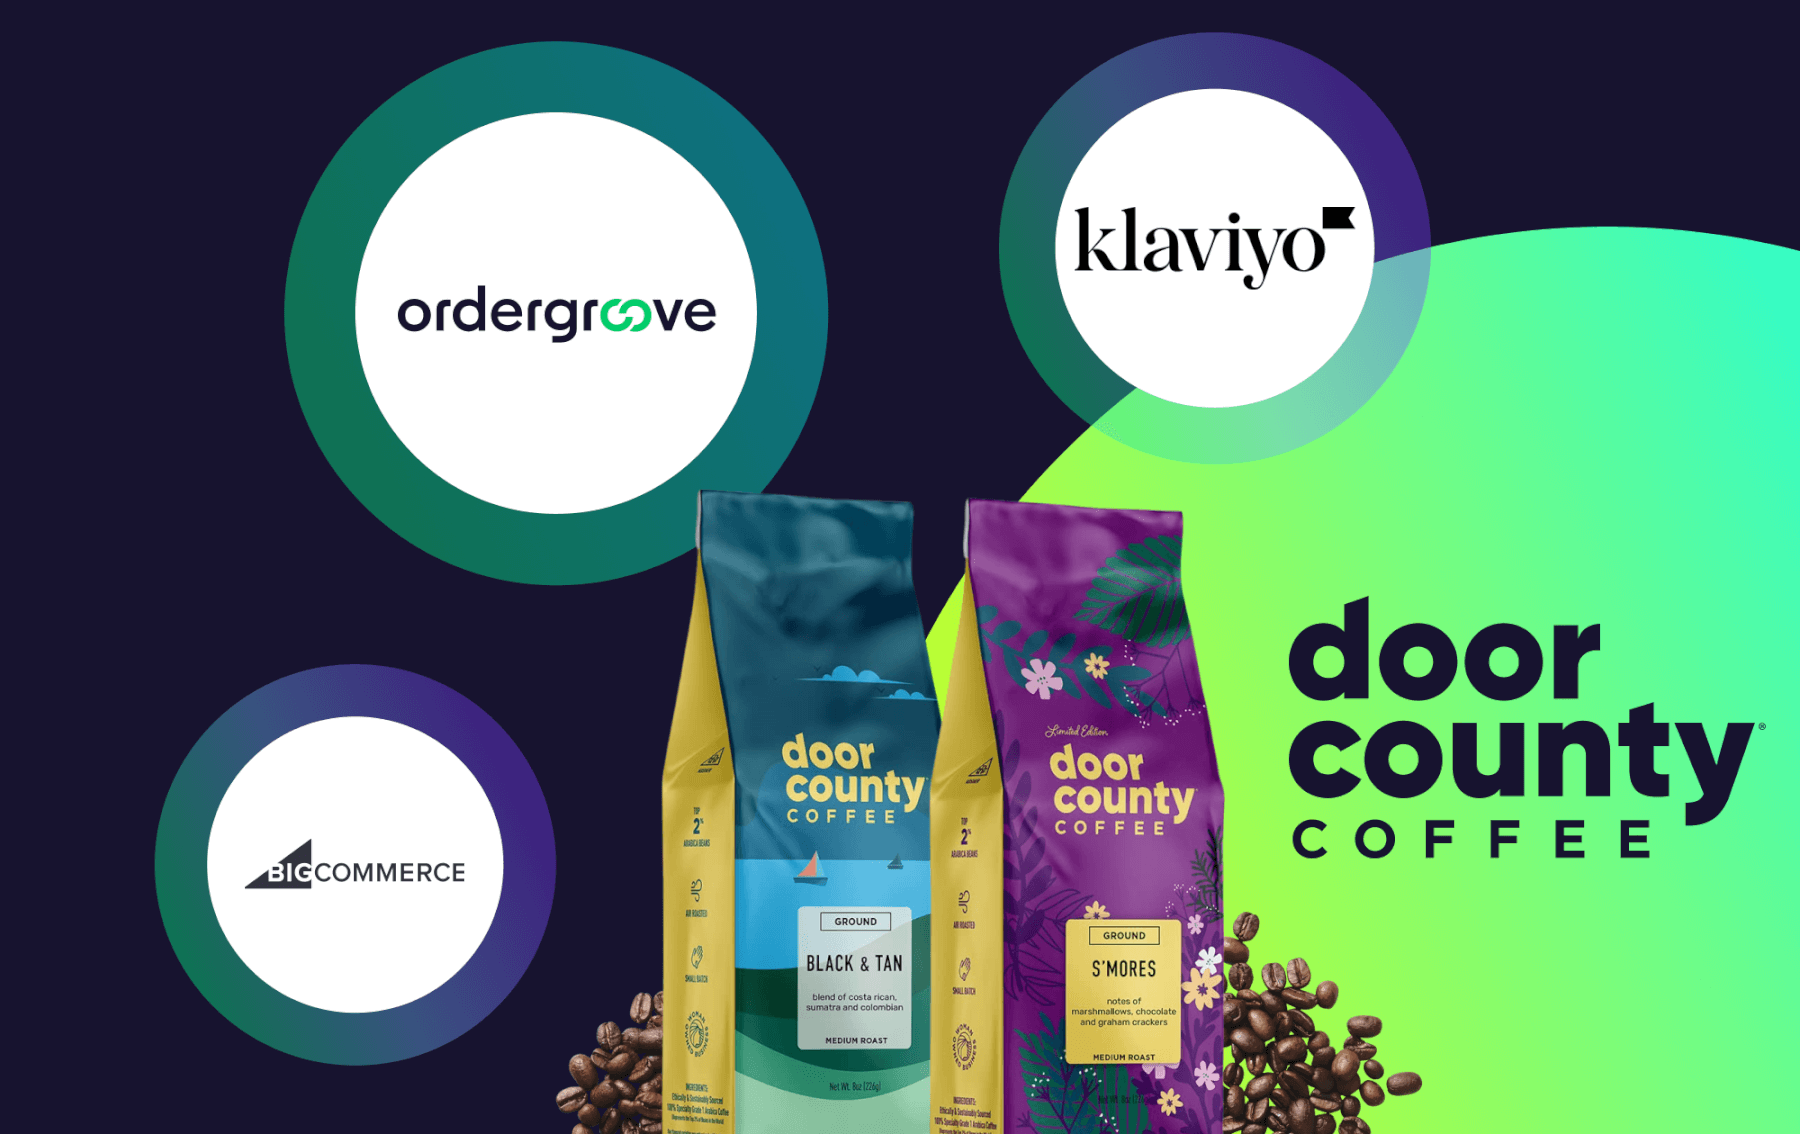 How Door County Coffee uses Ordergroove and Klaviyo to personalize seasonal upsell campaigns to grow recurring revenue